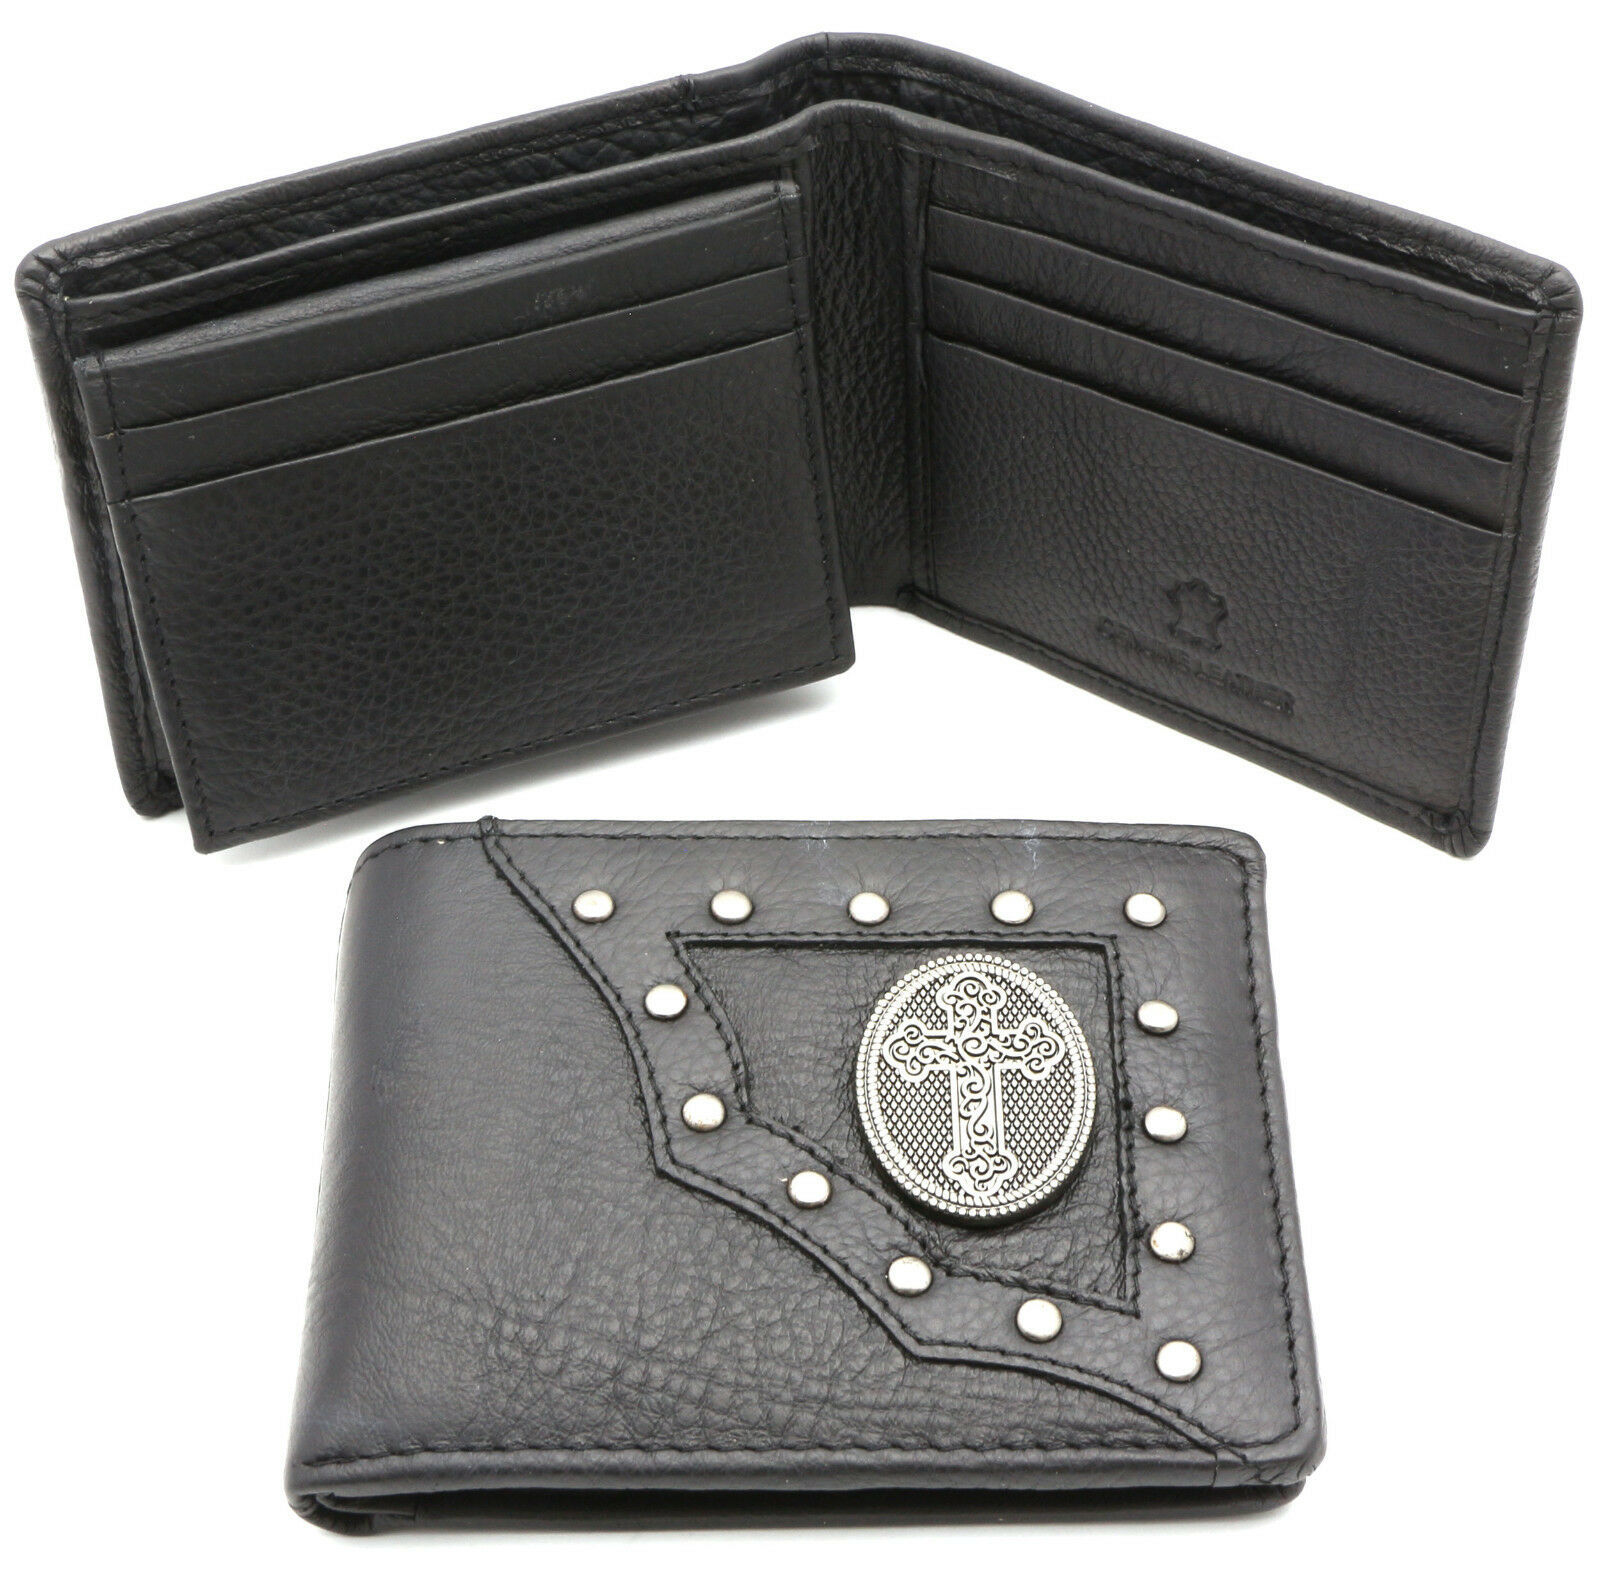 Bifold Black Genuine Leather Wallet with Christian Cross Design with